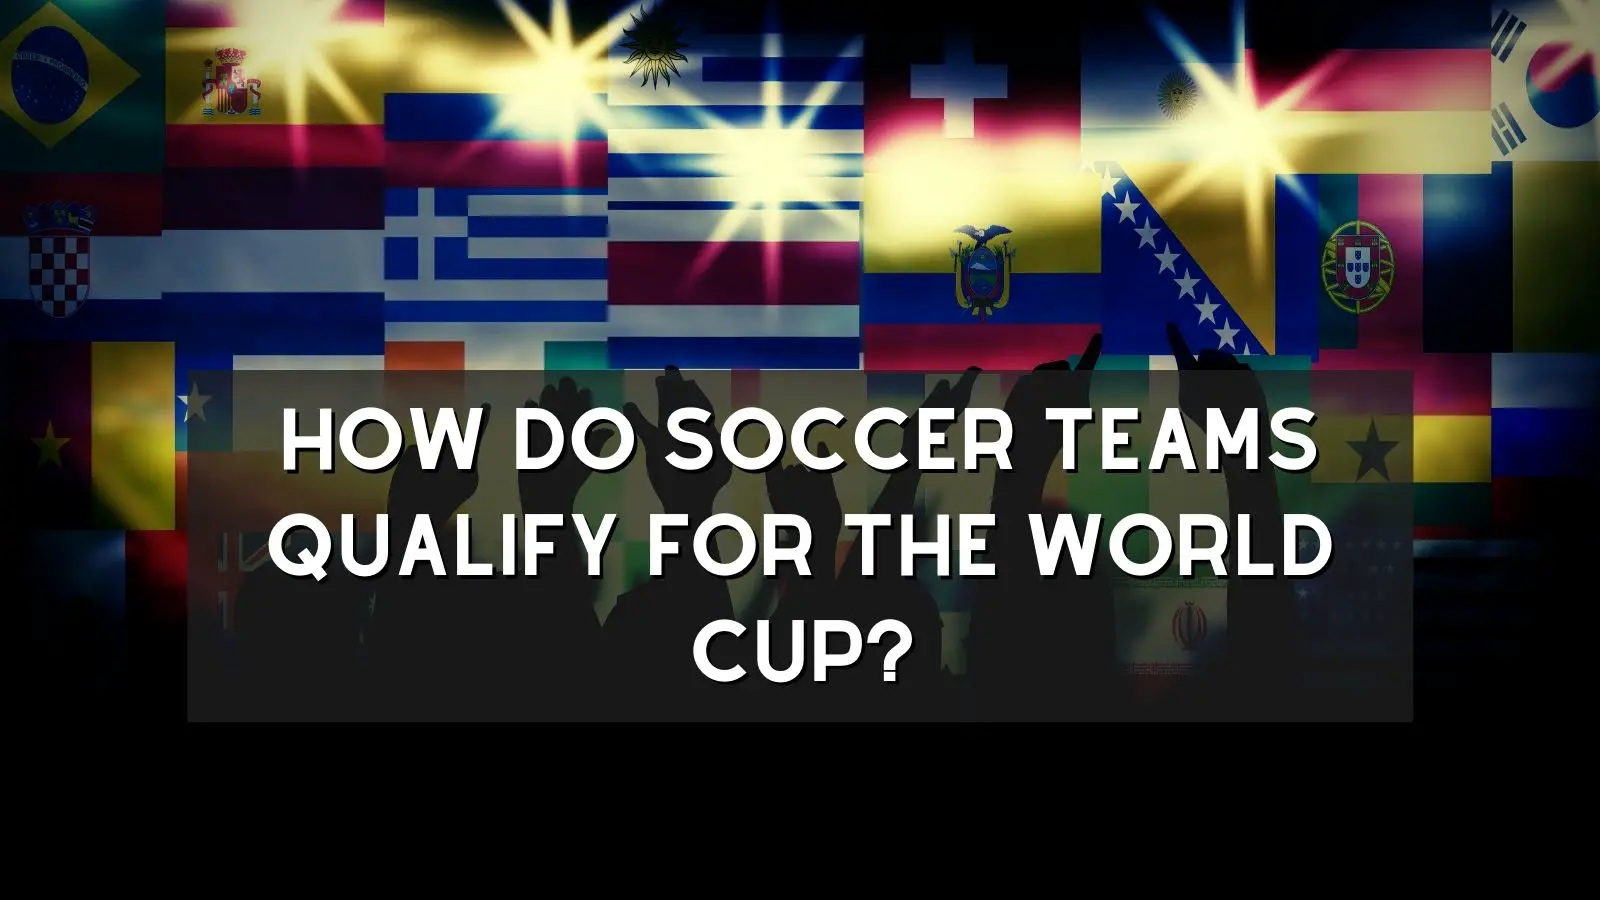 How Do Soccer Teams Qualify For The World Cup?